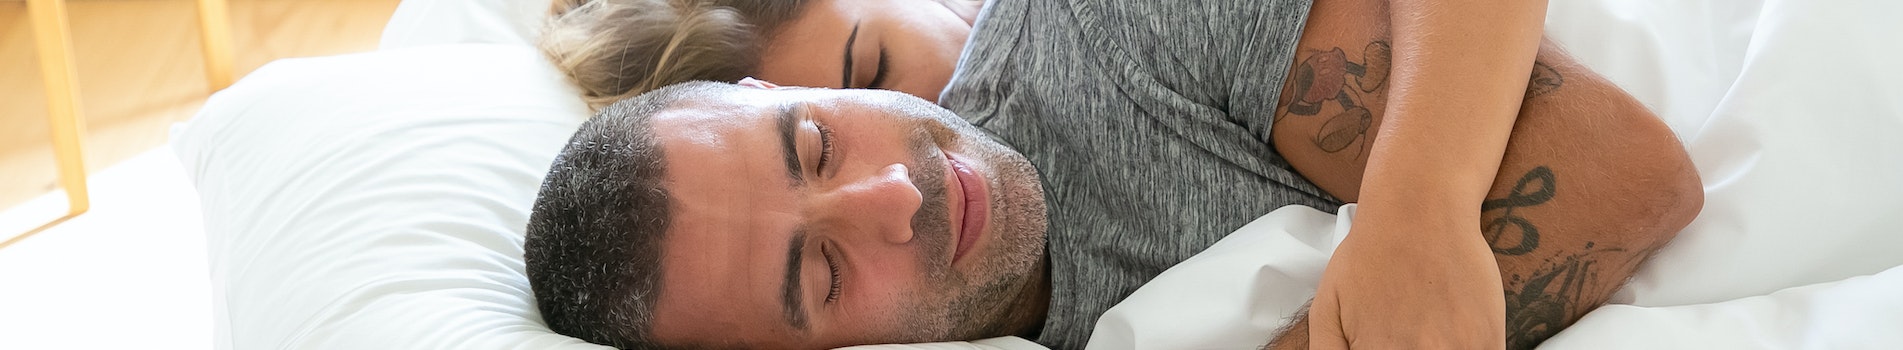 Sharing a Bed with Your Partner: 5 Tips for Success